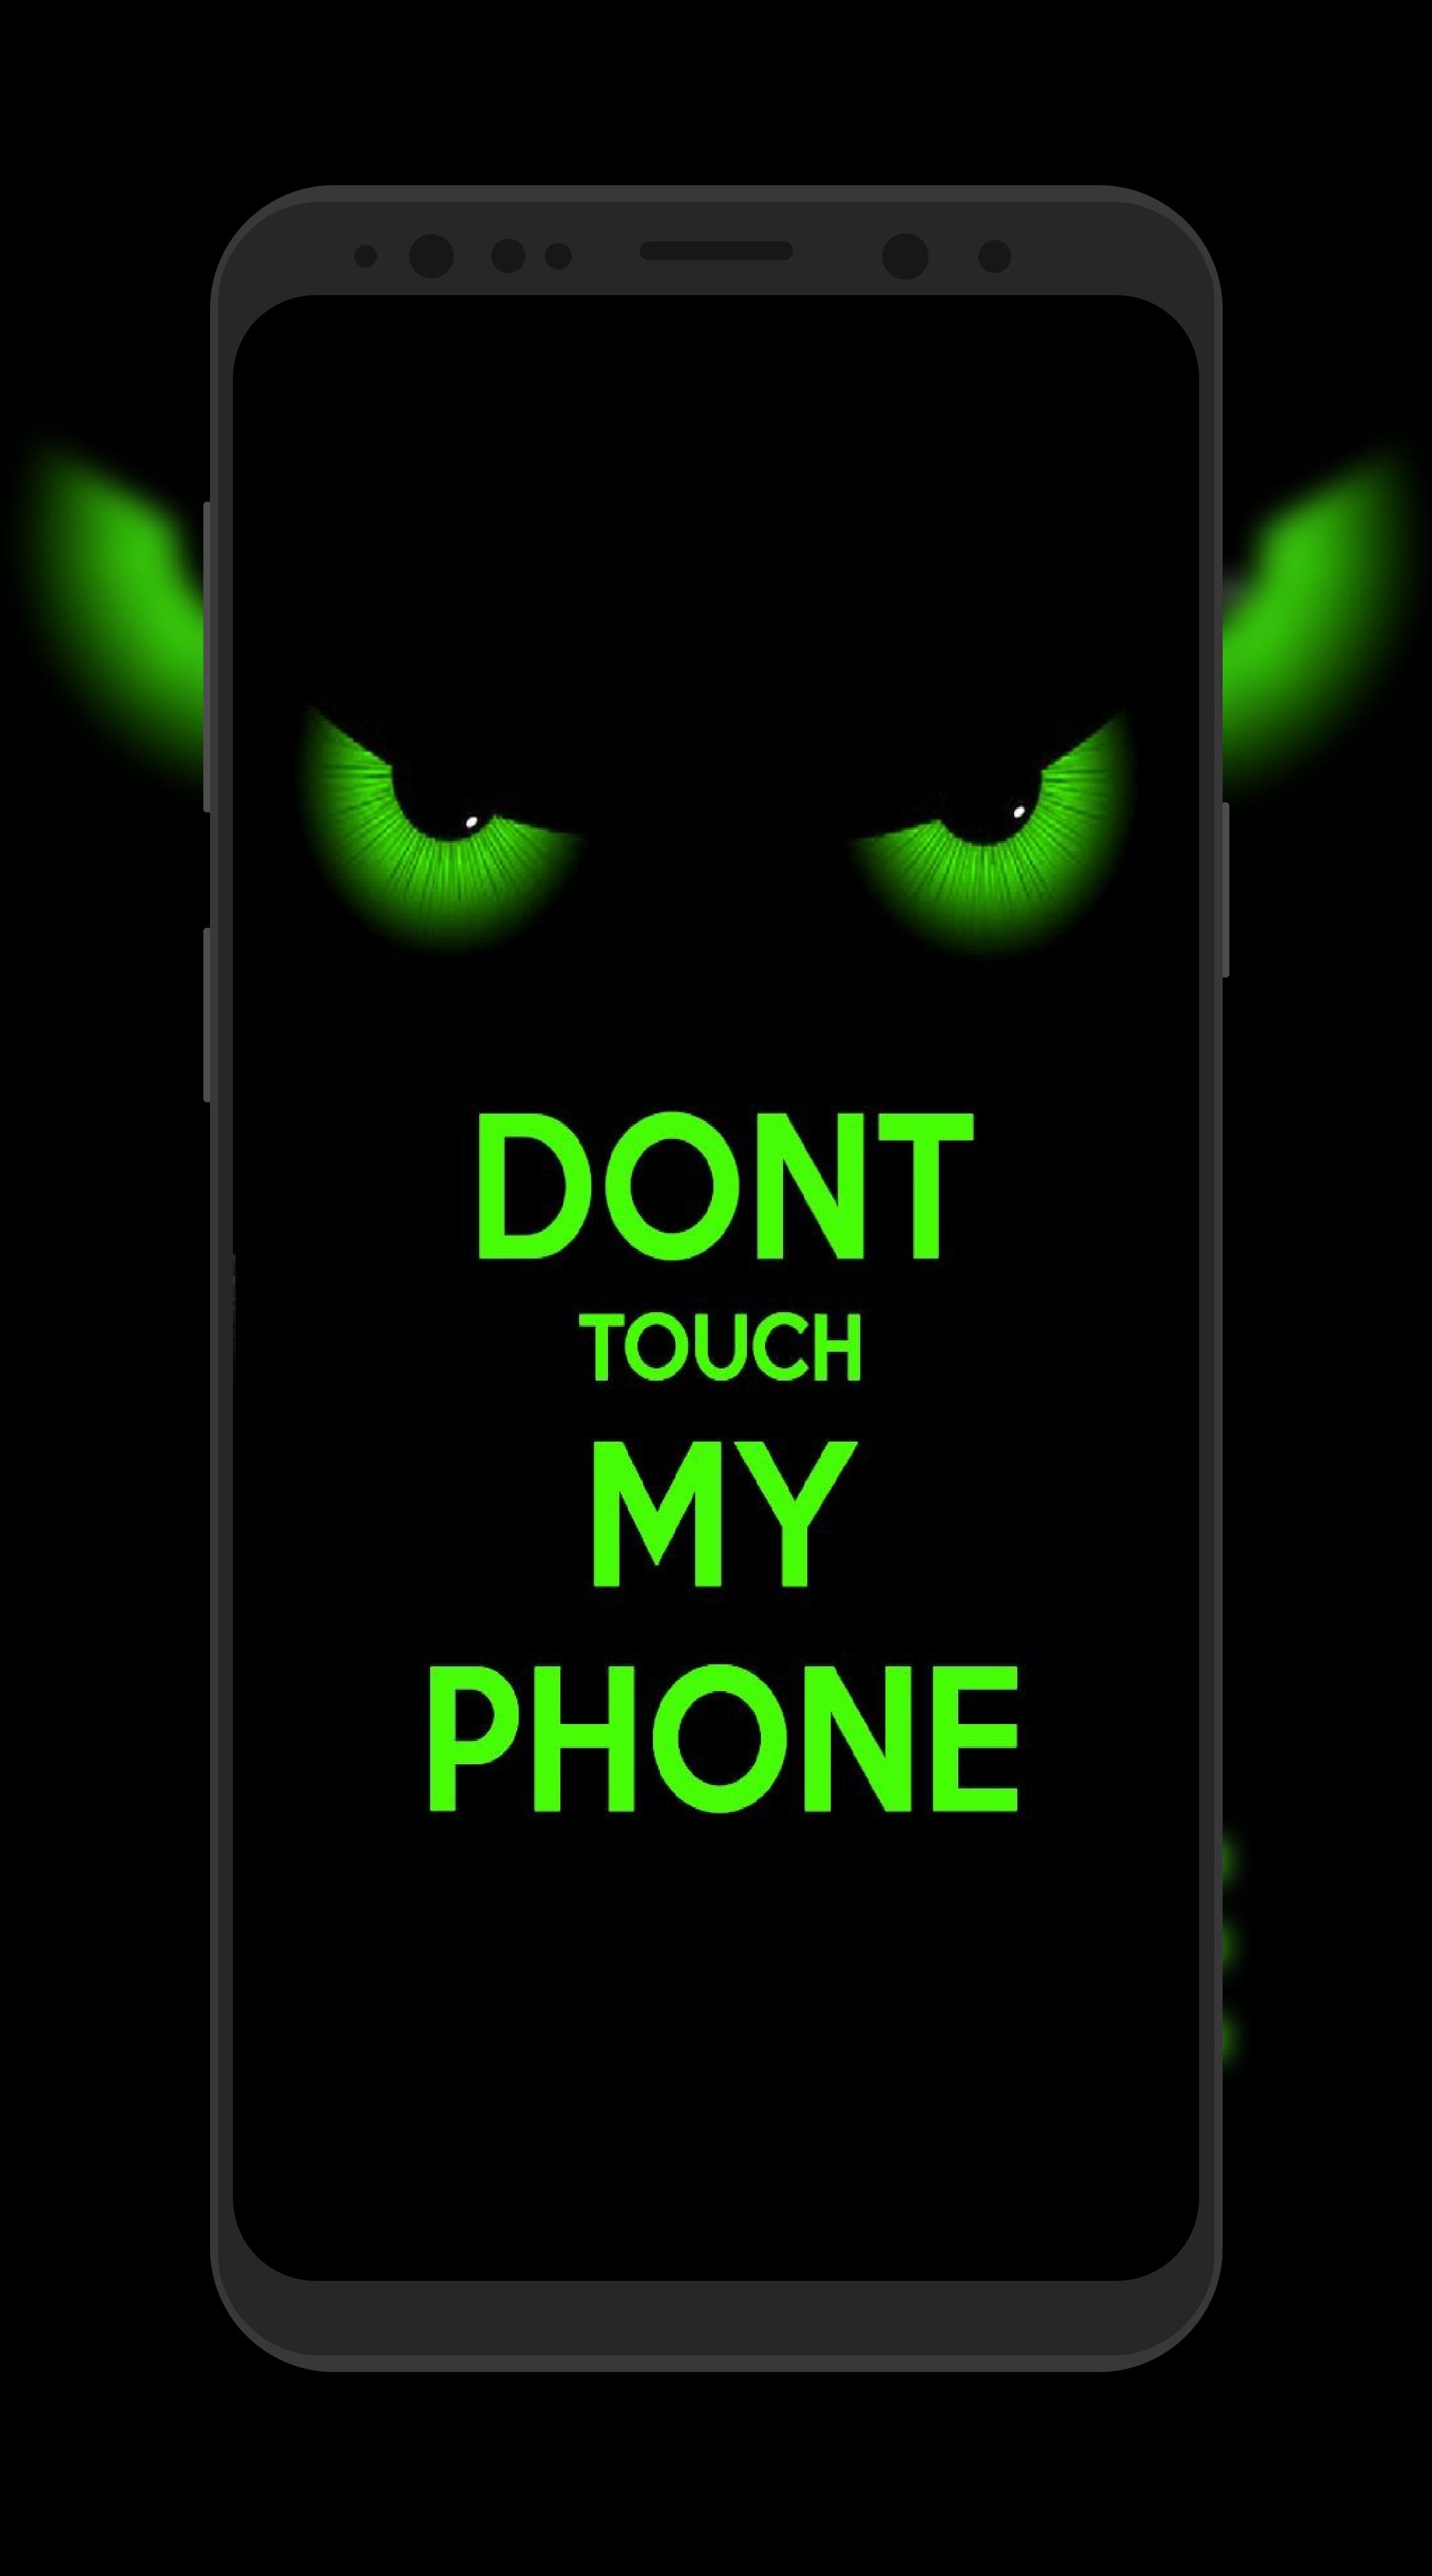 Don't Touch My Phone Wallpaper स्क्रीनशॉट 6.